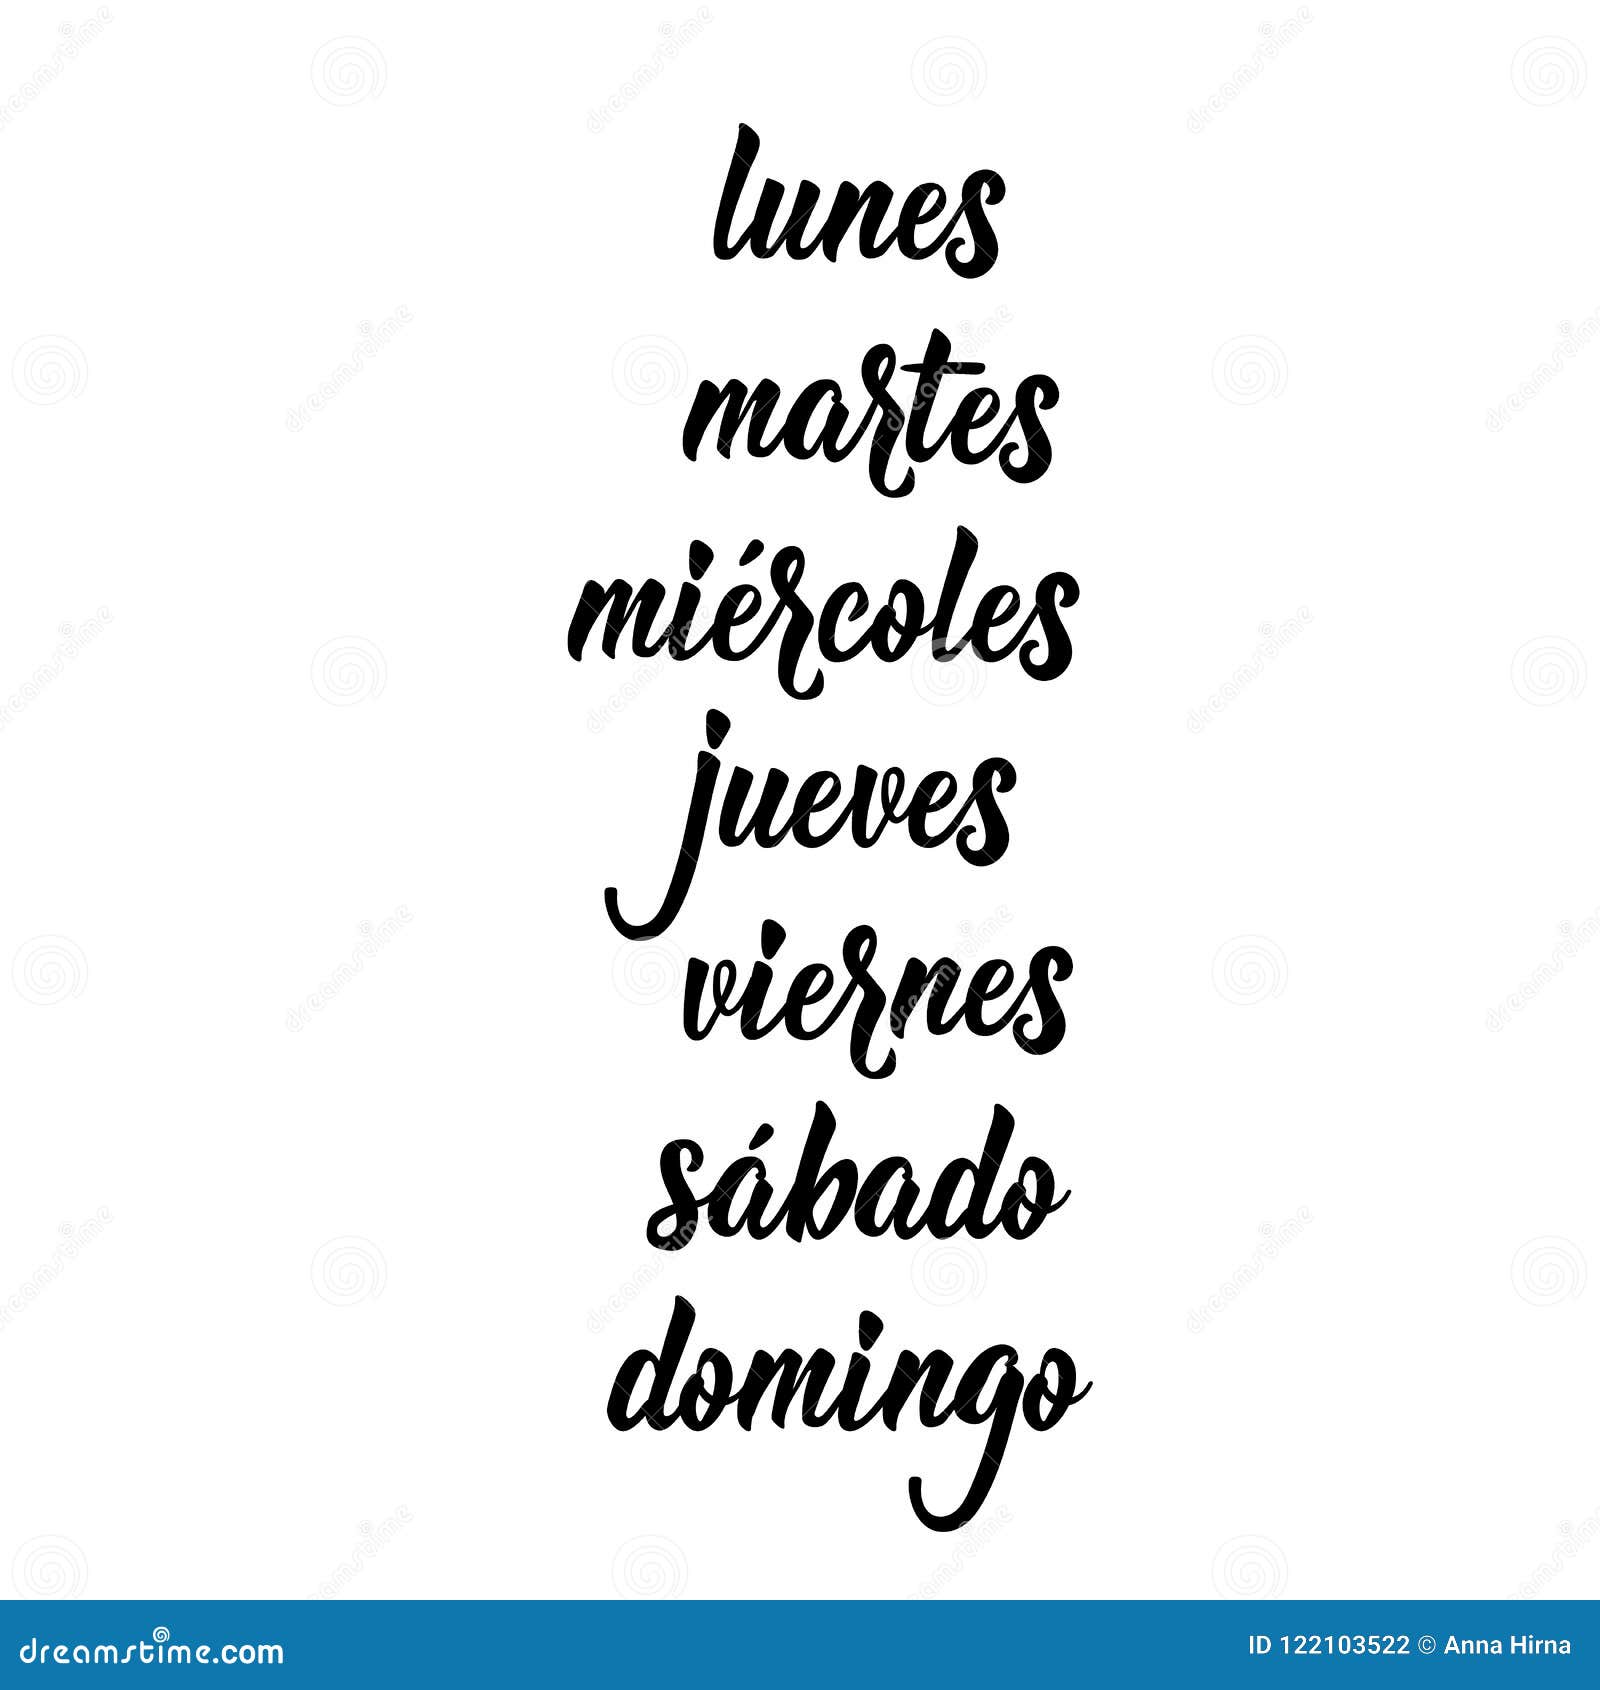 text in spanish: monday, tuesday, wednesday, thursday, friday, saturday, sunday. lettering. calligraphy  . lunes